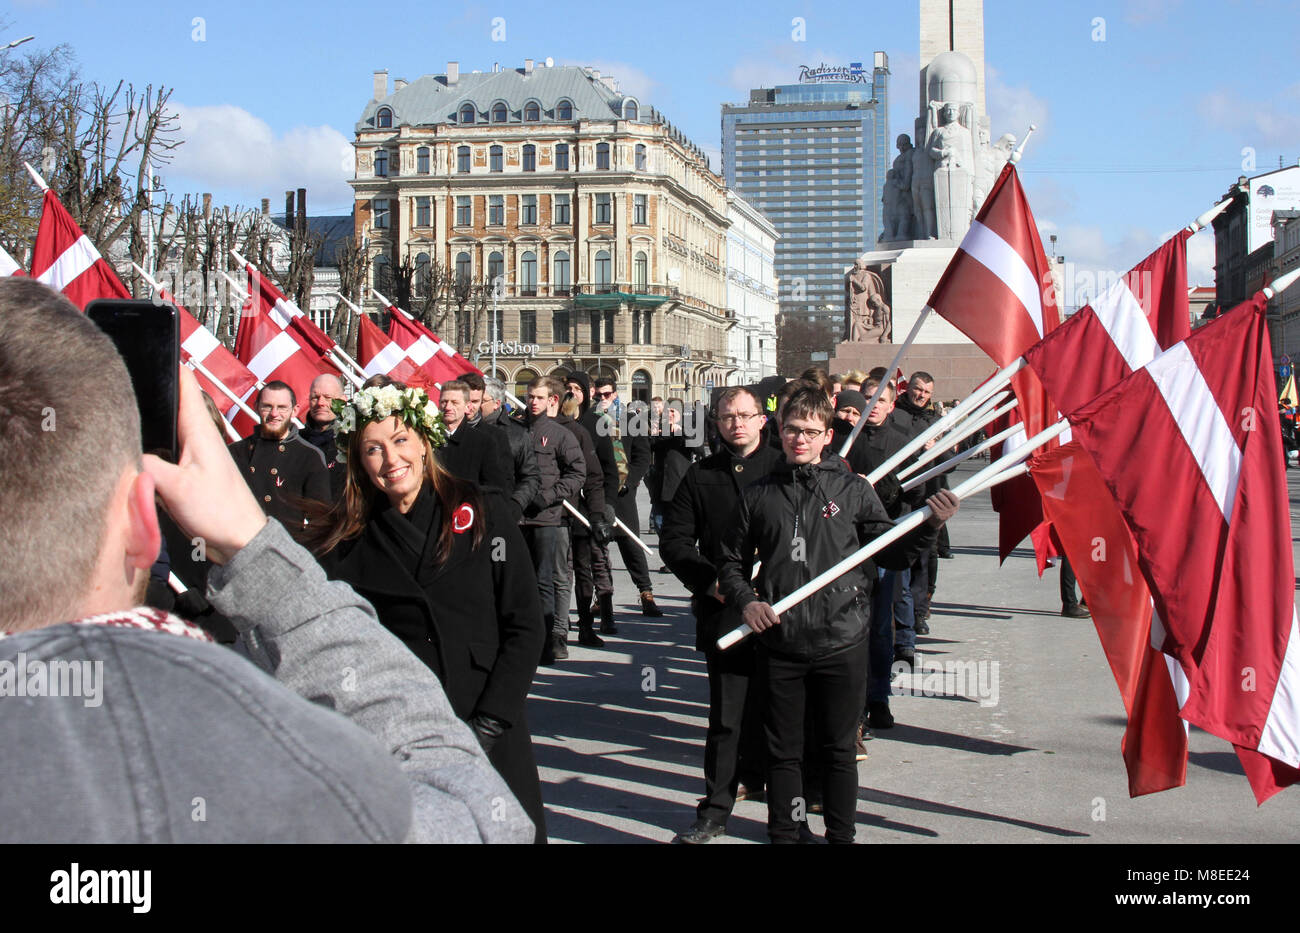 16 March 2018, Latvia, Riga: A young man (L) photographs adolescents holding Latvian flags during a commemoration march for Latvian Waffen-SS veterans in Riga. Latvian veterans of a unit of the Waffen-SS have commemorated their fallen comrades with the controversial march. On Friday about 1500 participants in the war and sympathisers marched through the capital of the Baltic EU and NATO country with massive police protection. Photo: Alexander Welscher/dpa Stock Photo